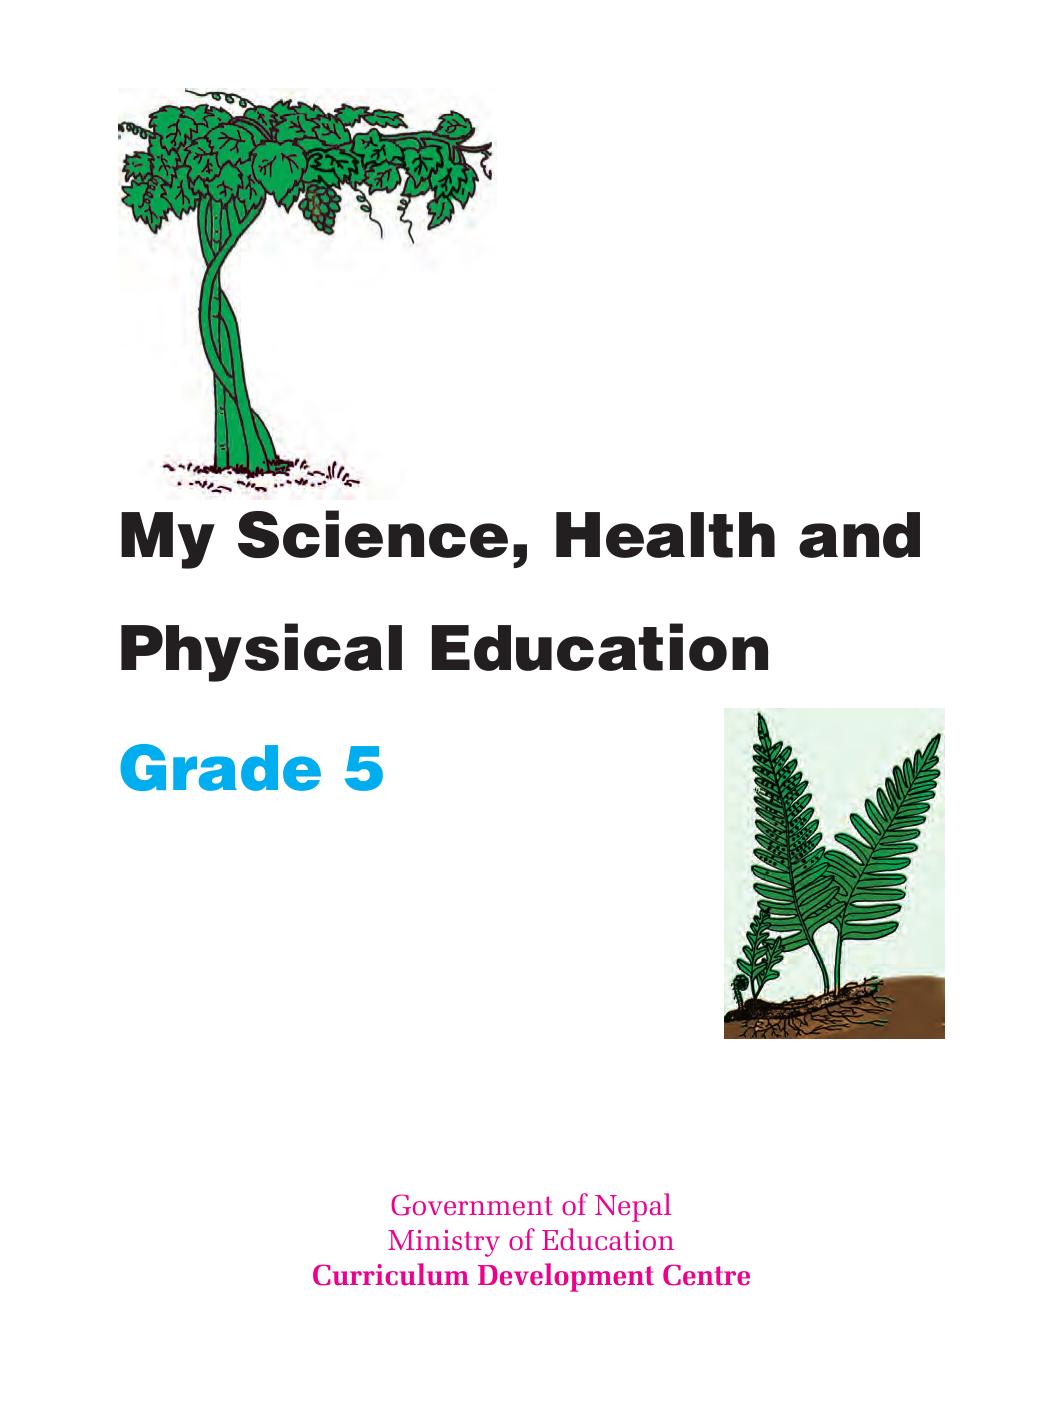 CDC 2018 - My Science, Health and Physical Education Grade 5